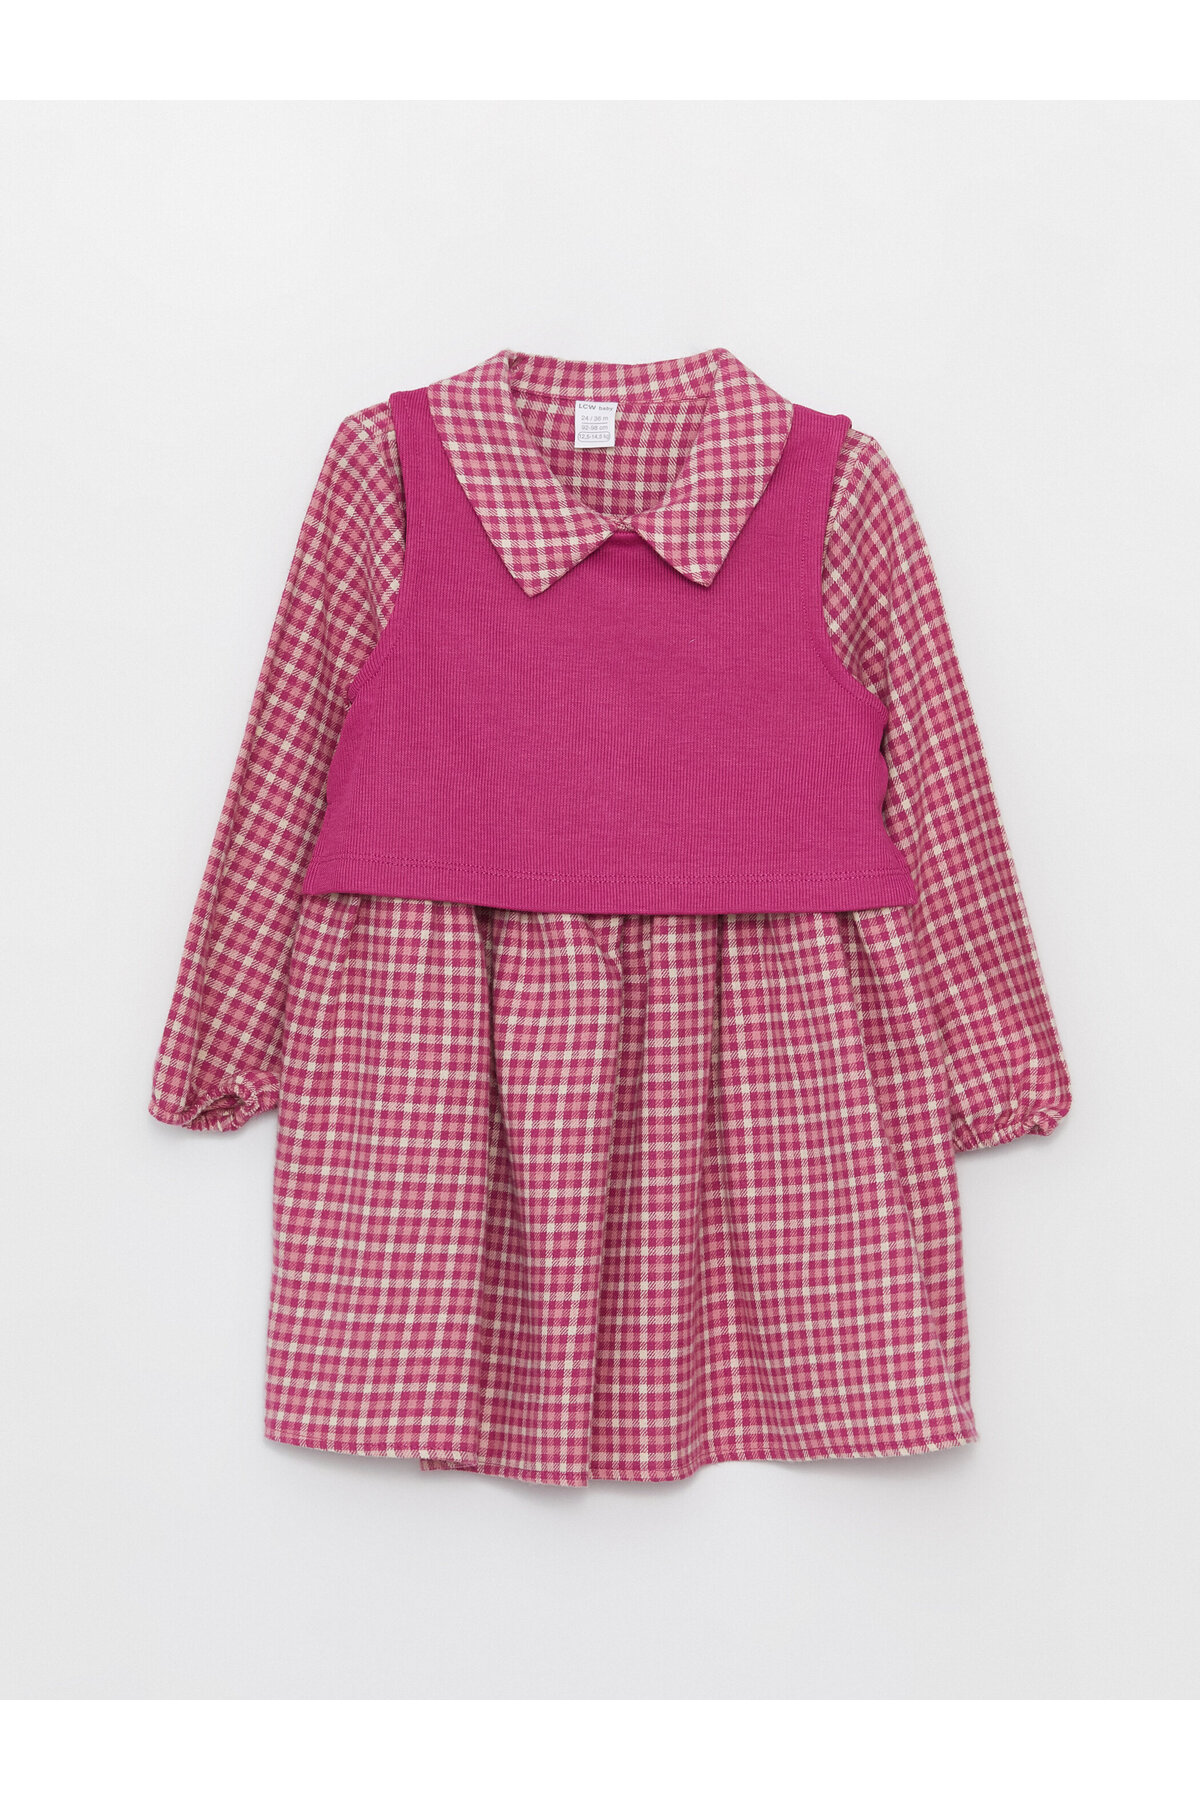 LC Waikiki Baby Girl Dress and Sweater with Plaid Long Sleeves